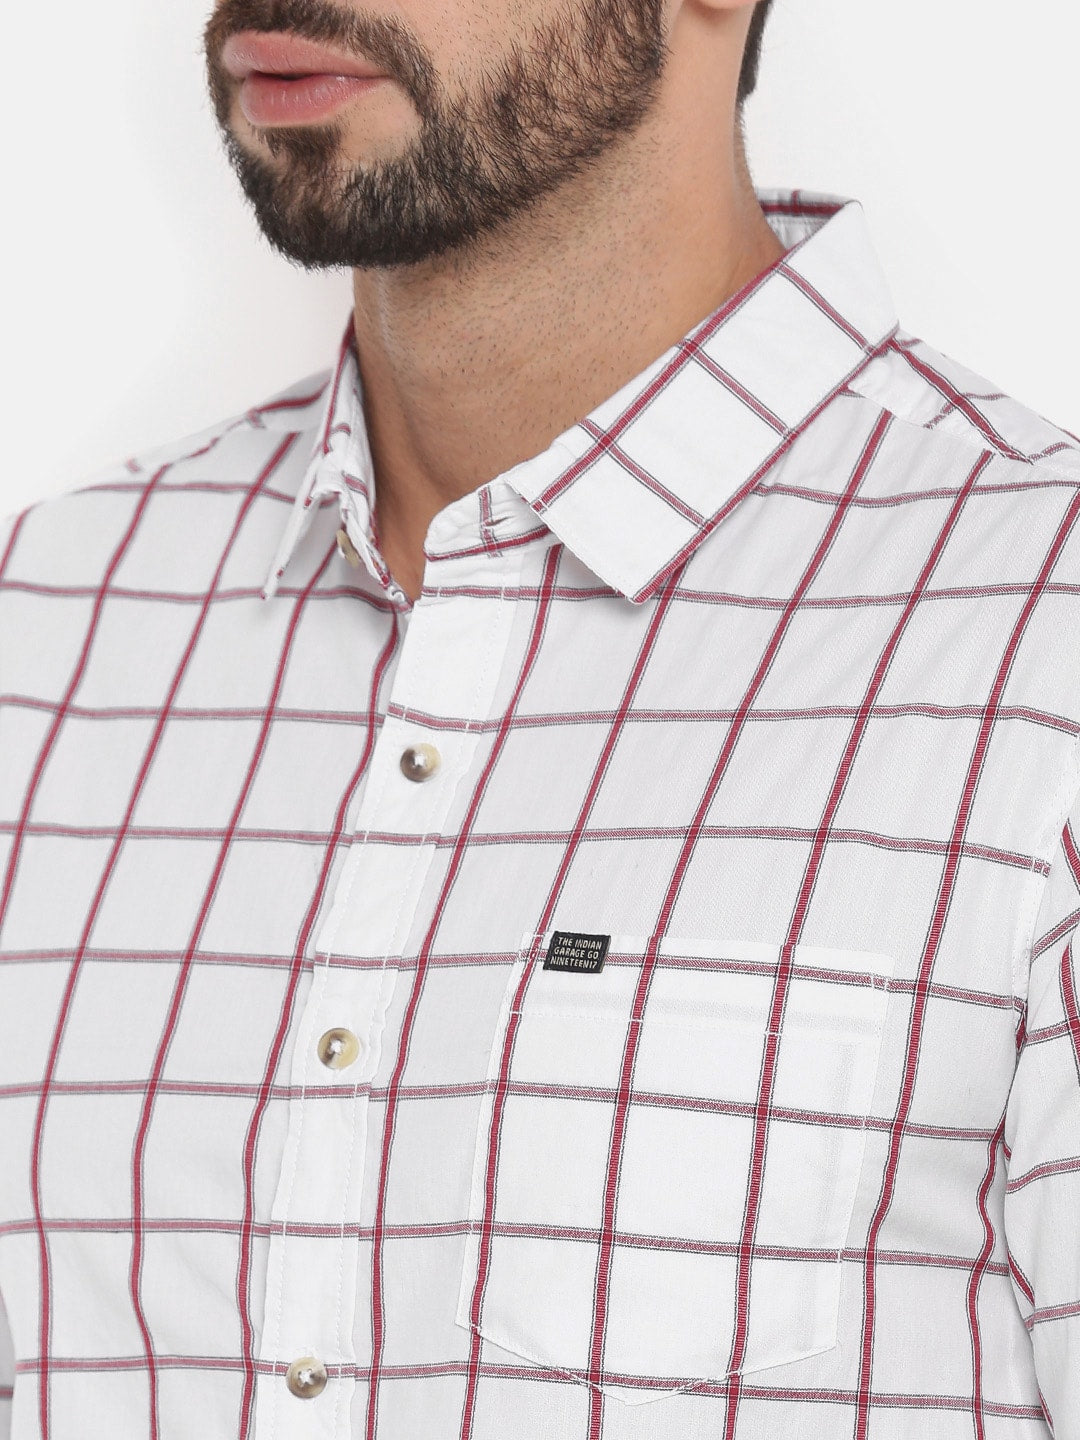 Shop Men Checked Casual Shirts Online.